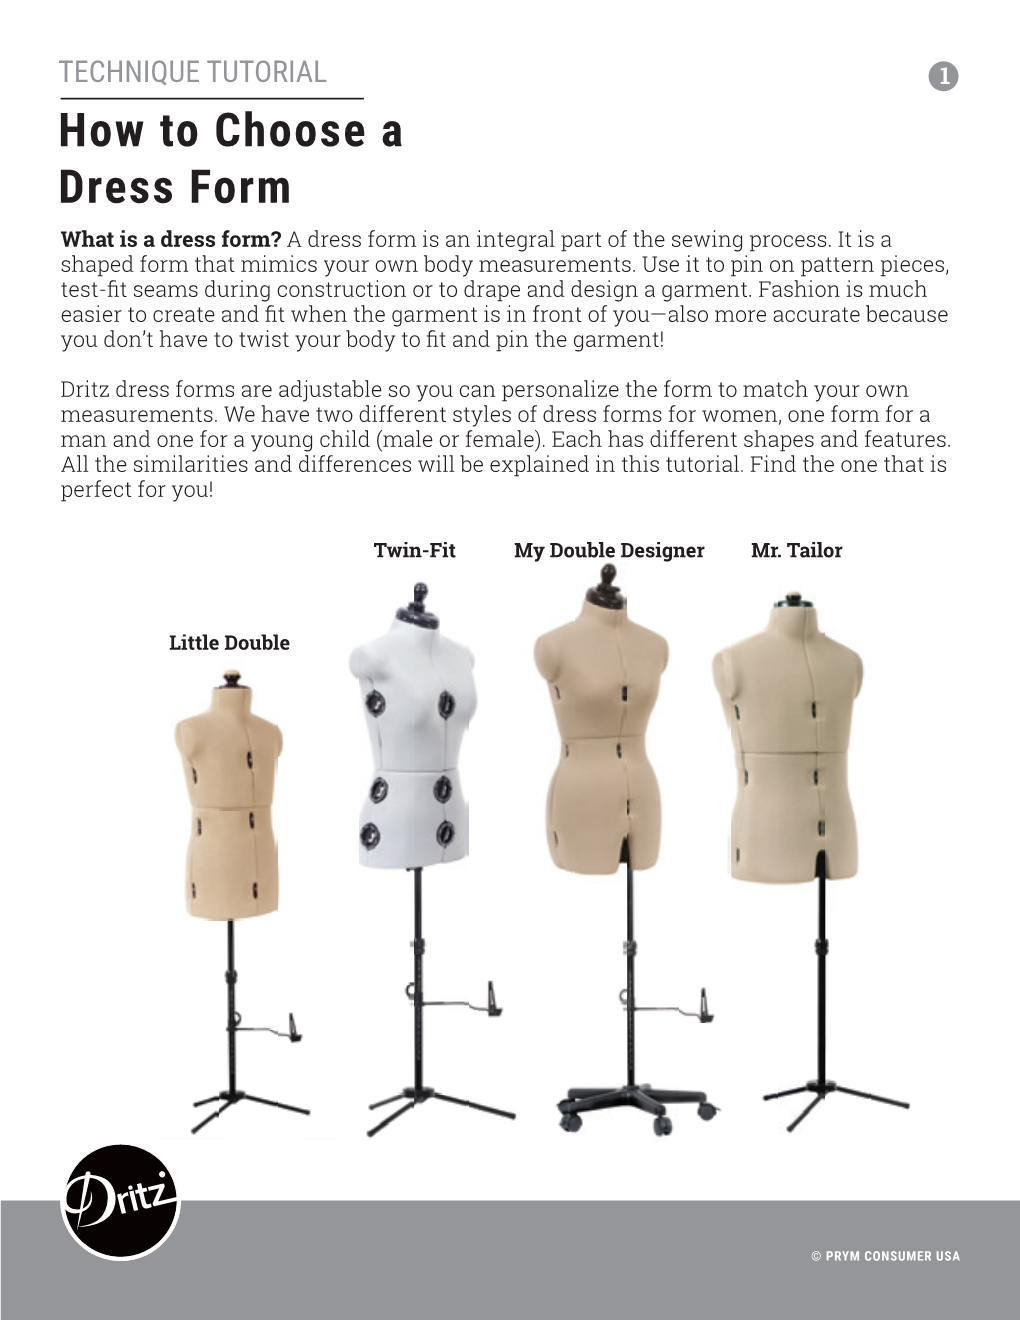 How to Choose a Dress Form What Is a Dress Form? a Dress Form Is an Integral Part of the Sewing Process